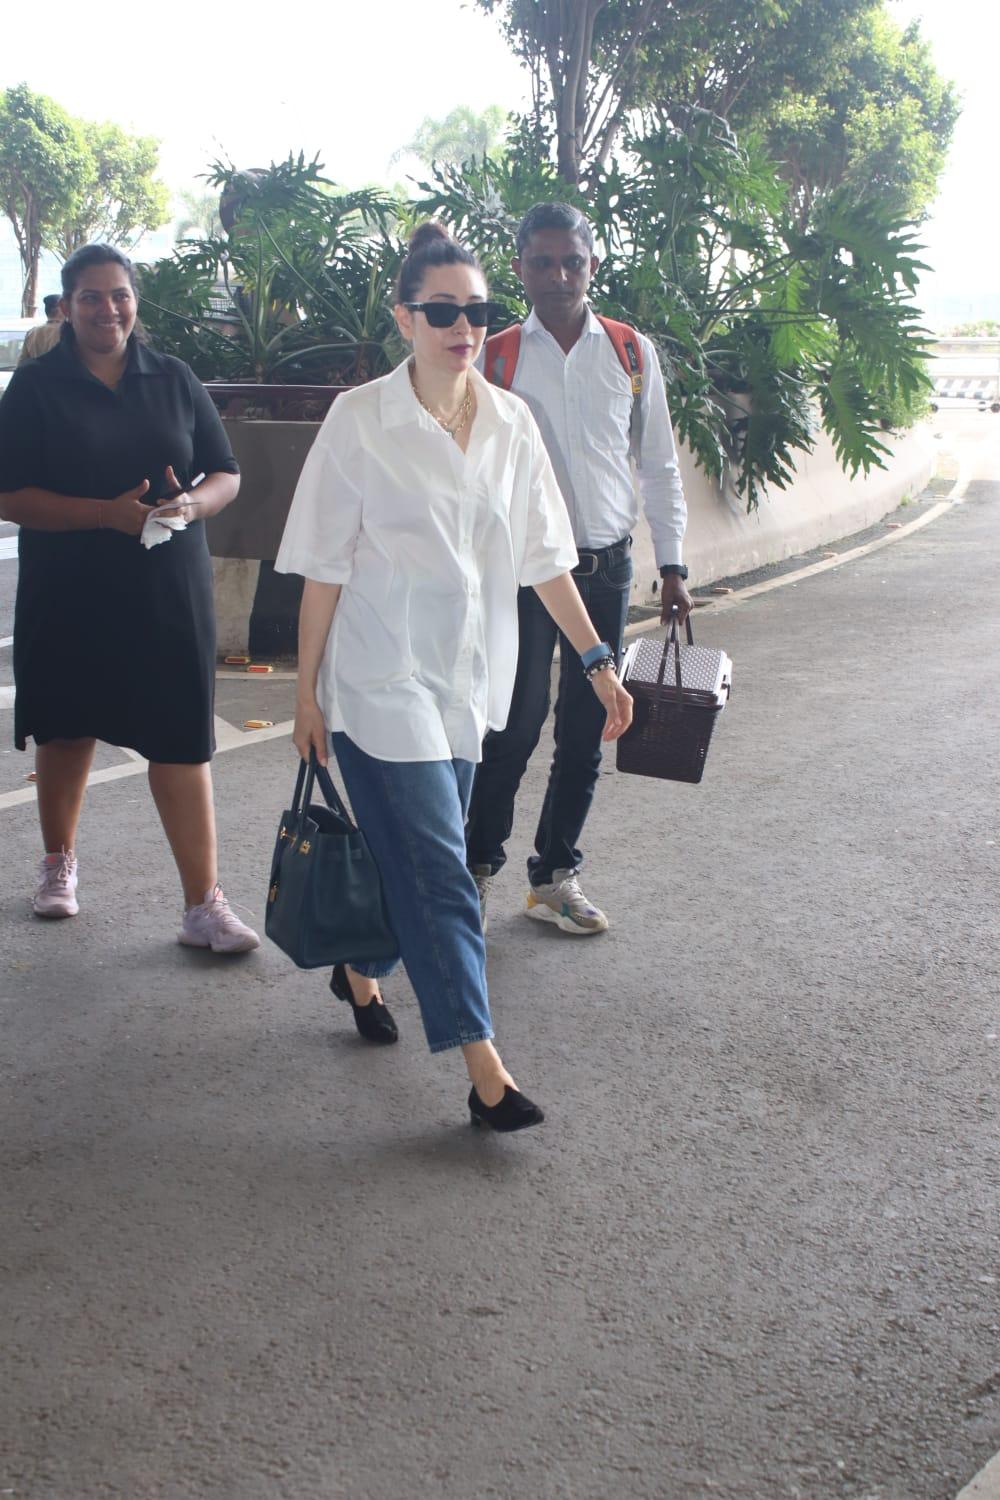 Karisma Kapoor looked stunning in a casual white shirt and blue jeans as she was snapped in the city